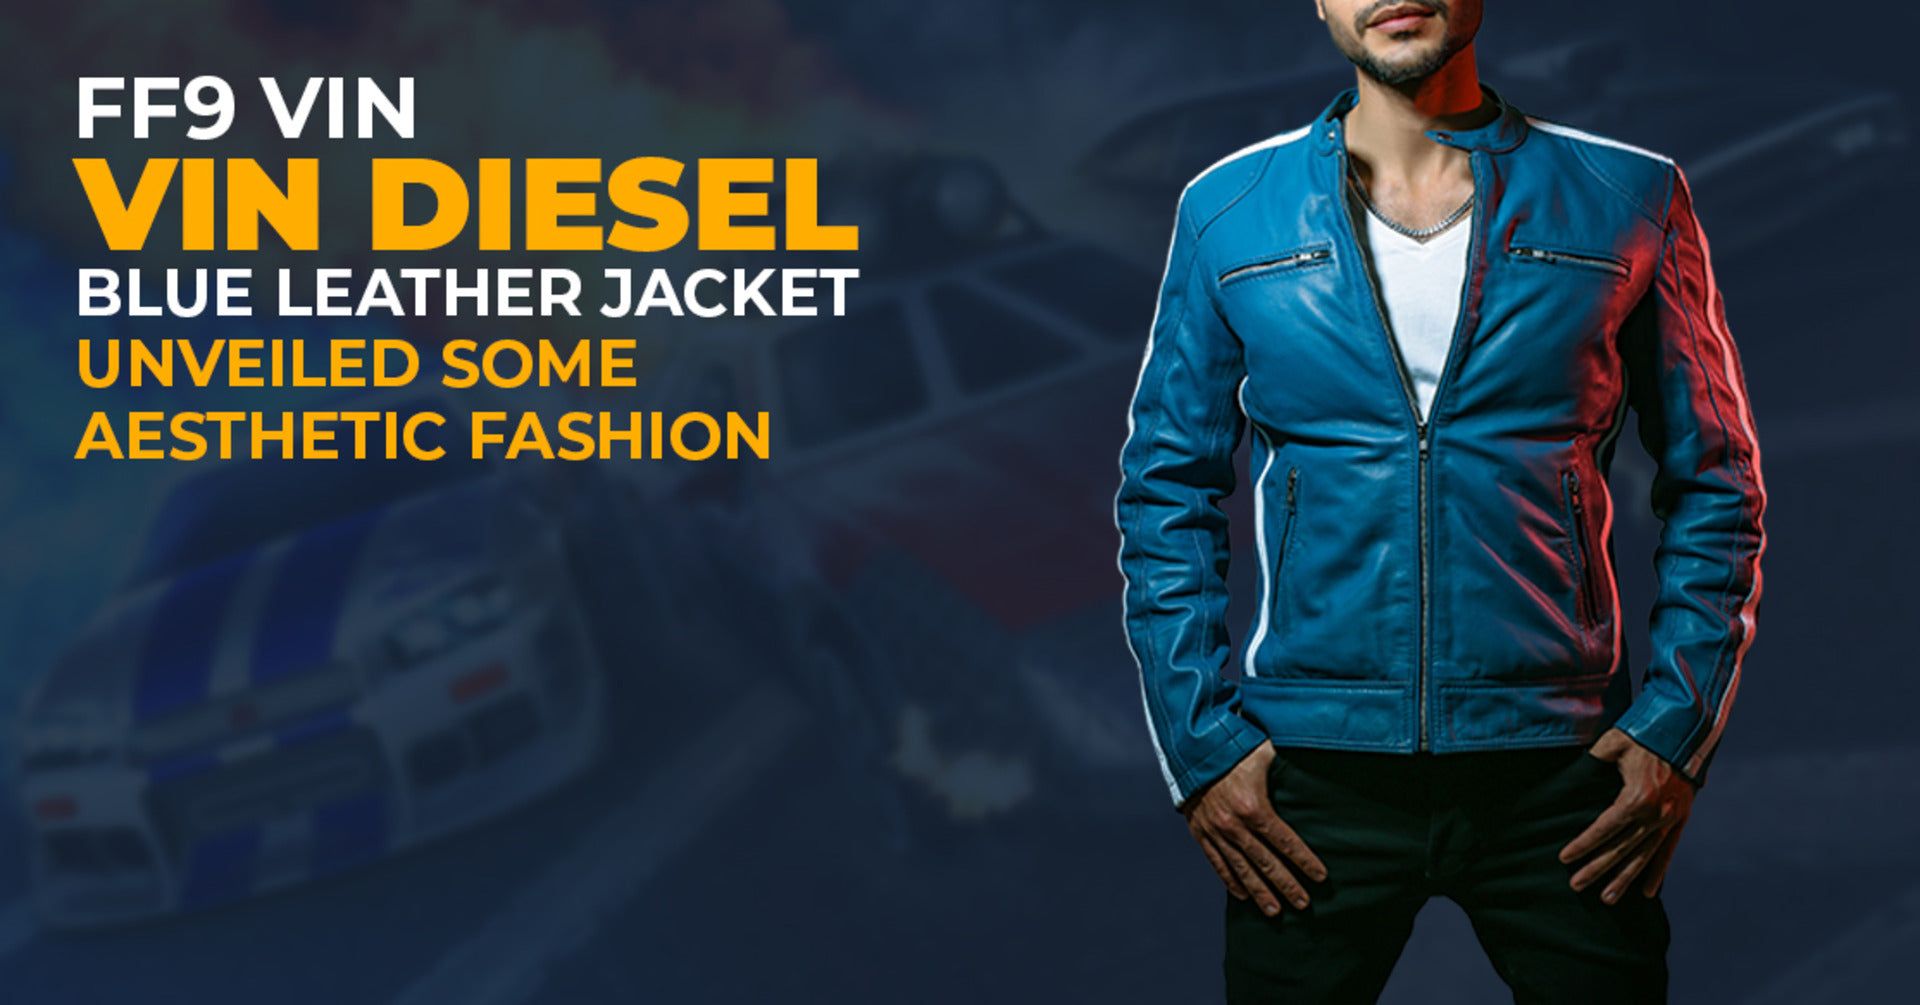 FF9 VIN DIESEL BLUE LEATHER JACKET UNVEILED SOME AESTHETIC FASHION